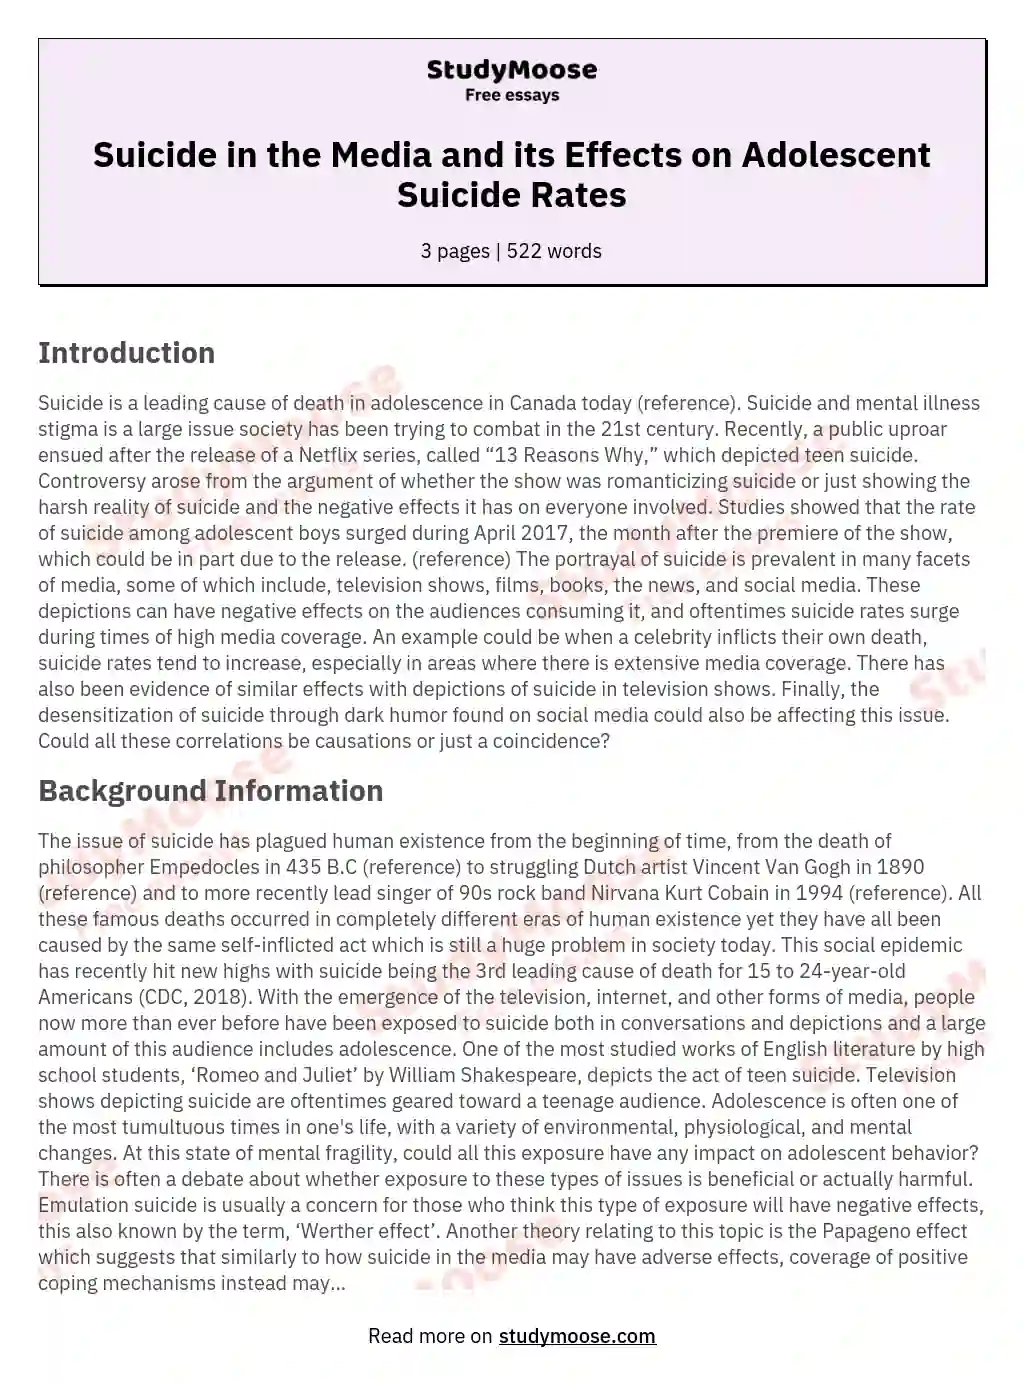 Suicide in the Media and its Effects on Adolescent Suicide Rates